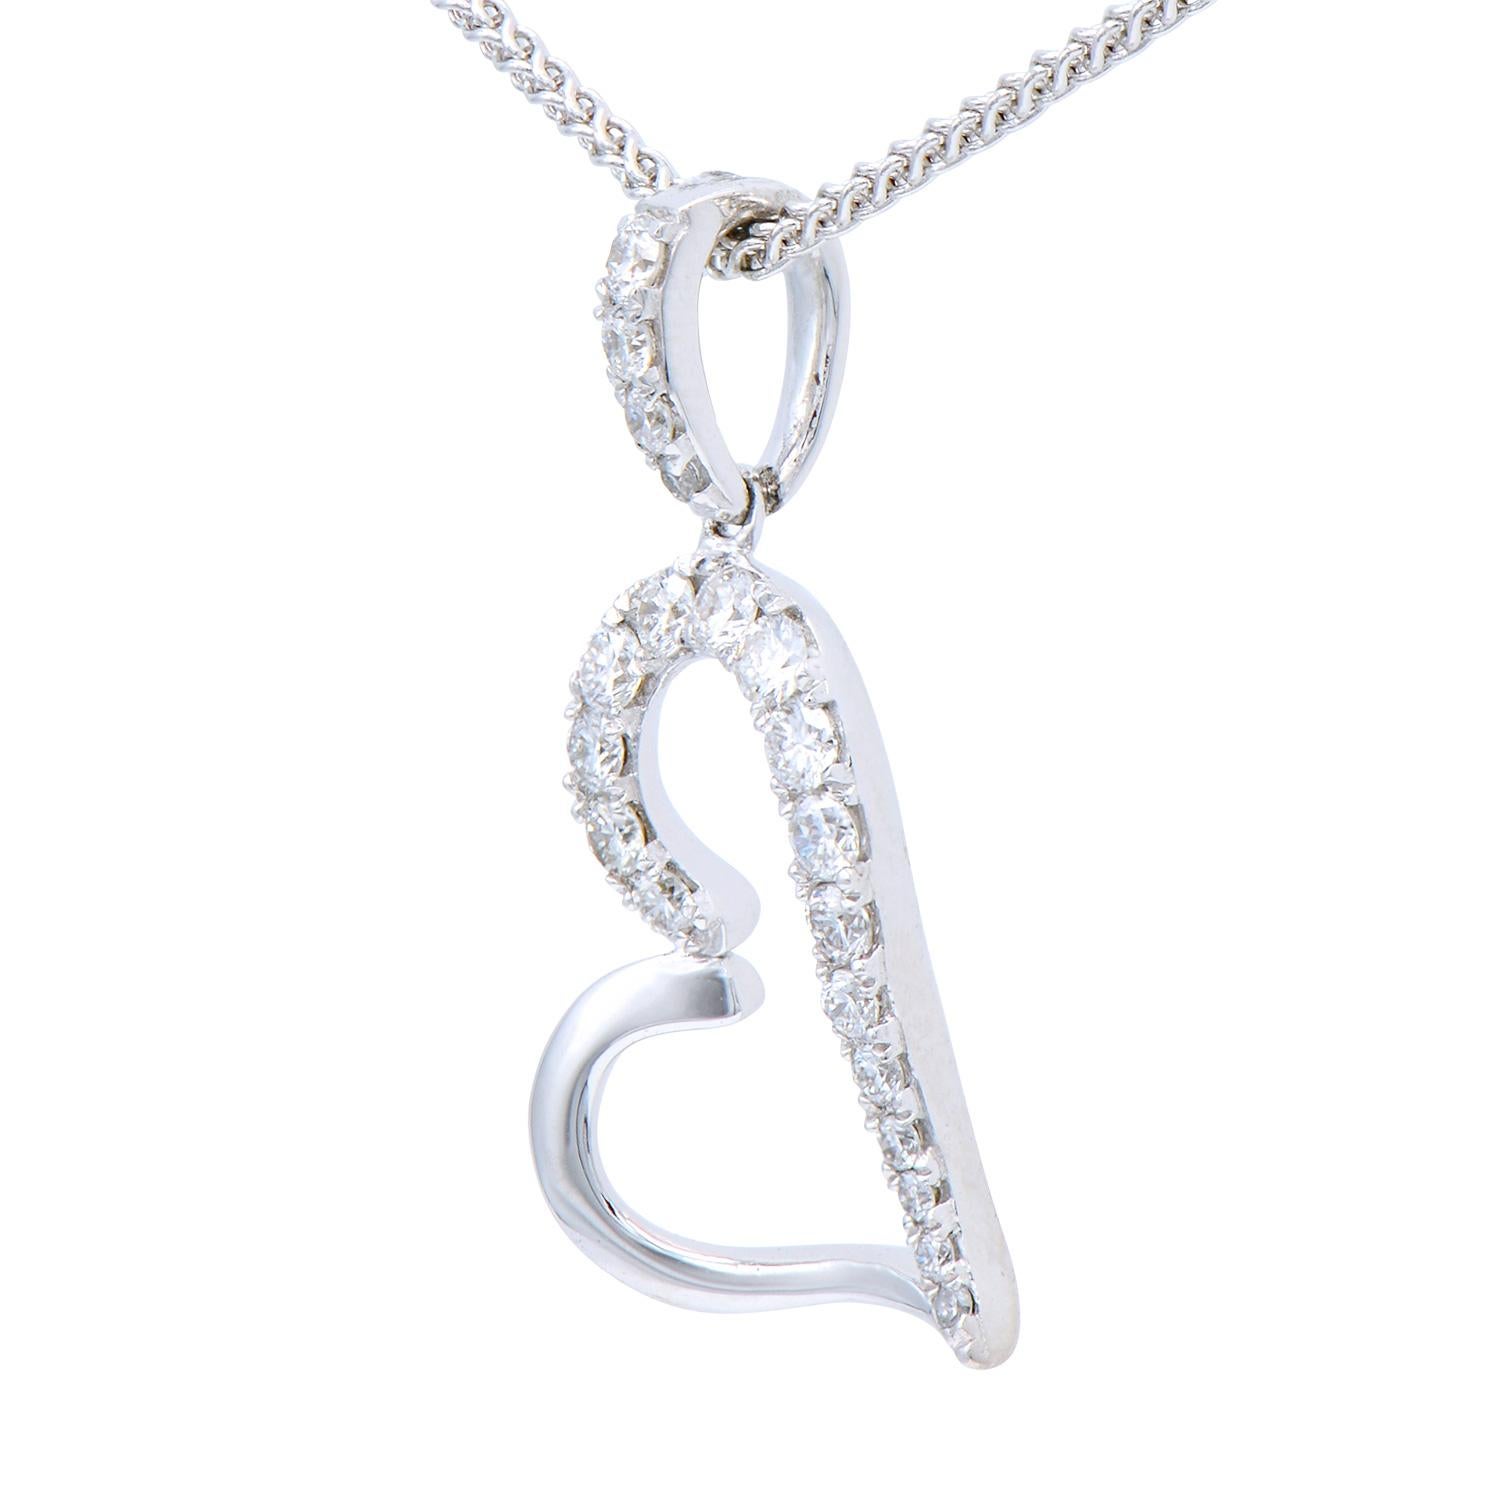 Show your love with this beautiful 18 karat white gold heart necklace enhanced with sparkling stunning diamonds. This pendant contains 20 round VS2, G color diamonds with a total of 0.20 carats which are set in 1.0 gram of 18 karat white gold.